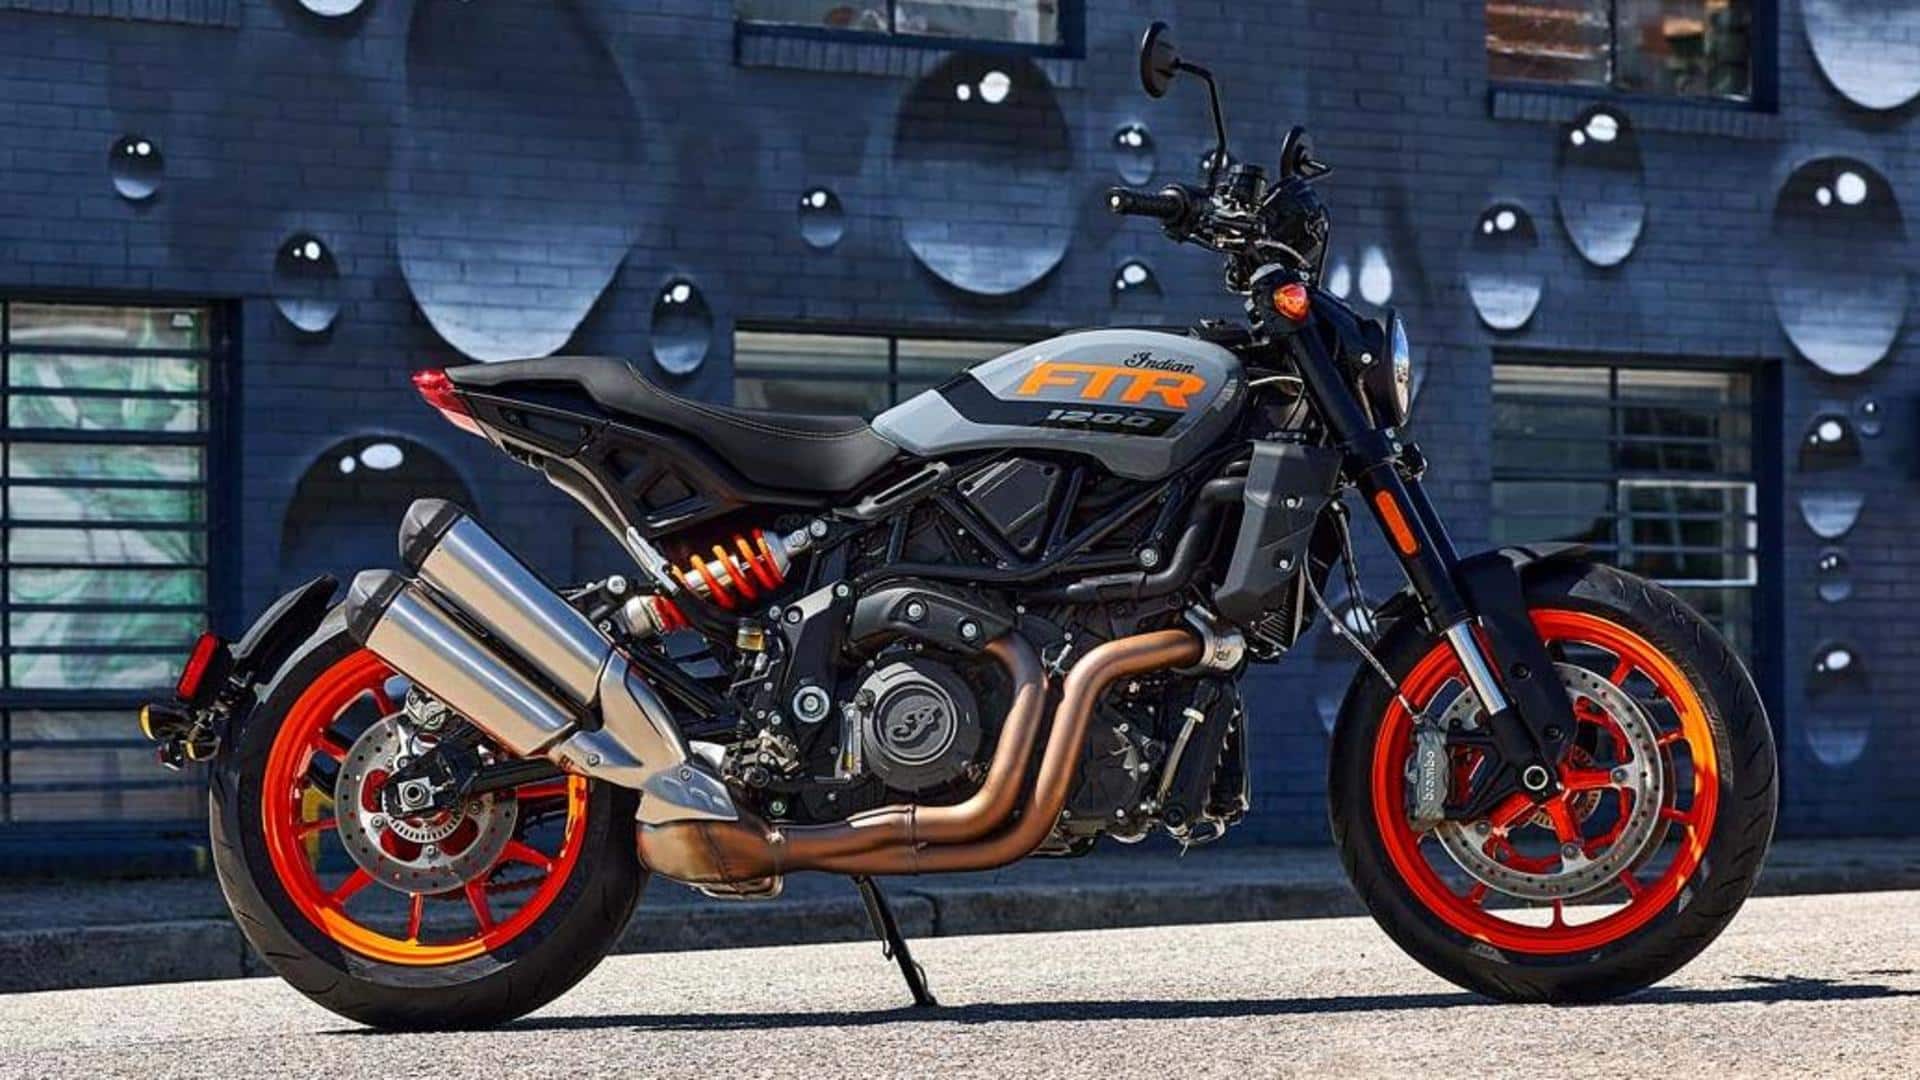 2023 Indian FTR range of motorcycles revealed: Check features